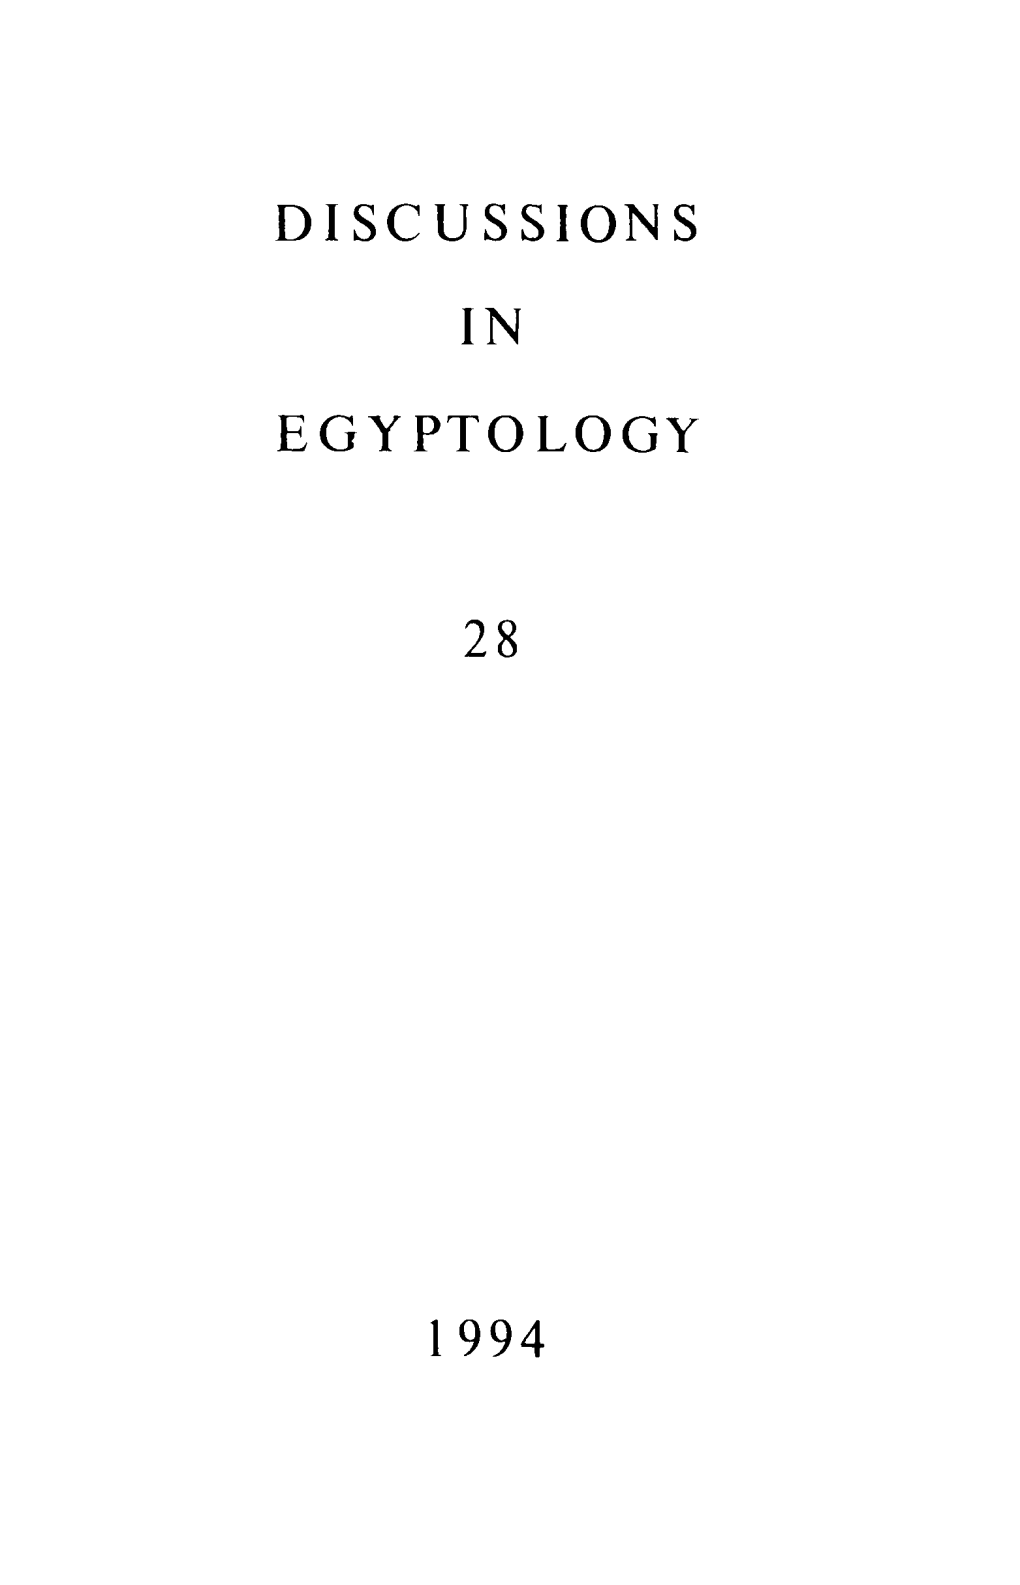 Discussions in Egyptology 28,1994 ISSN 0268-3083